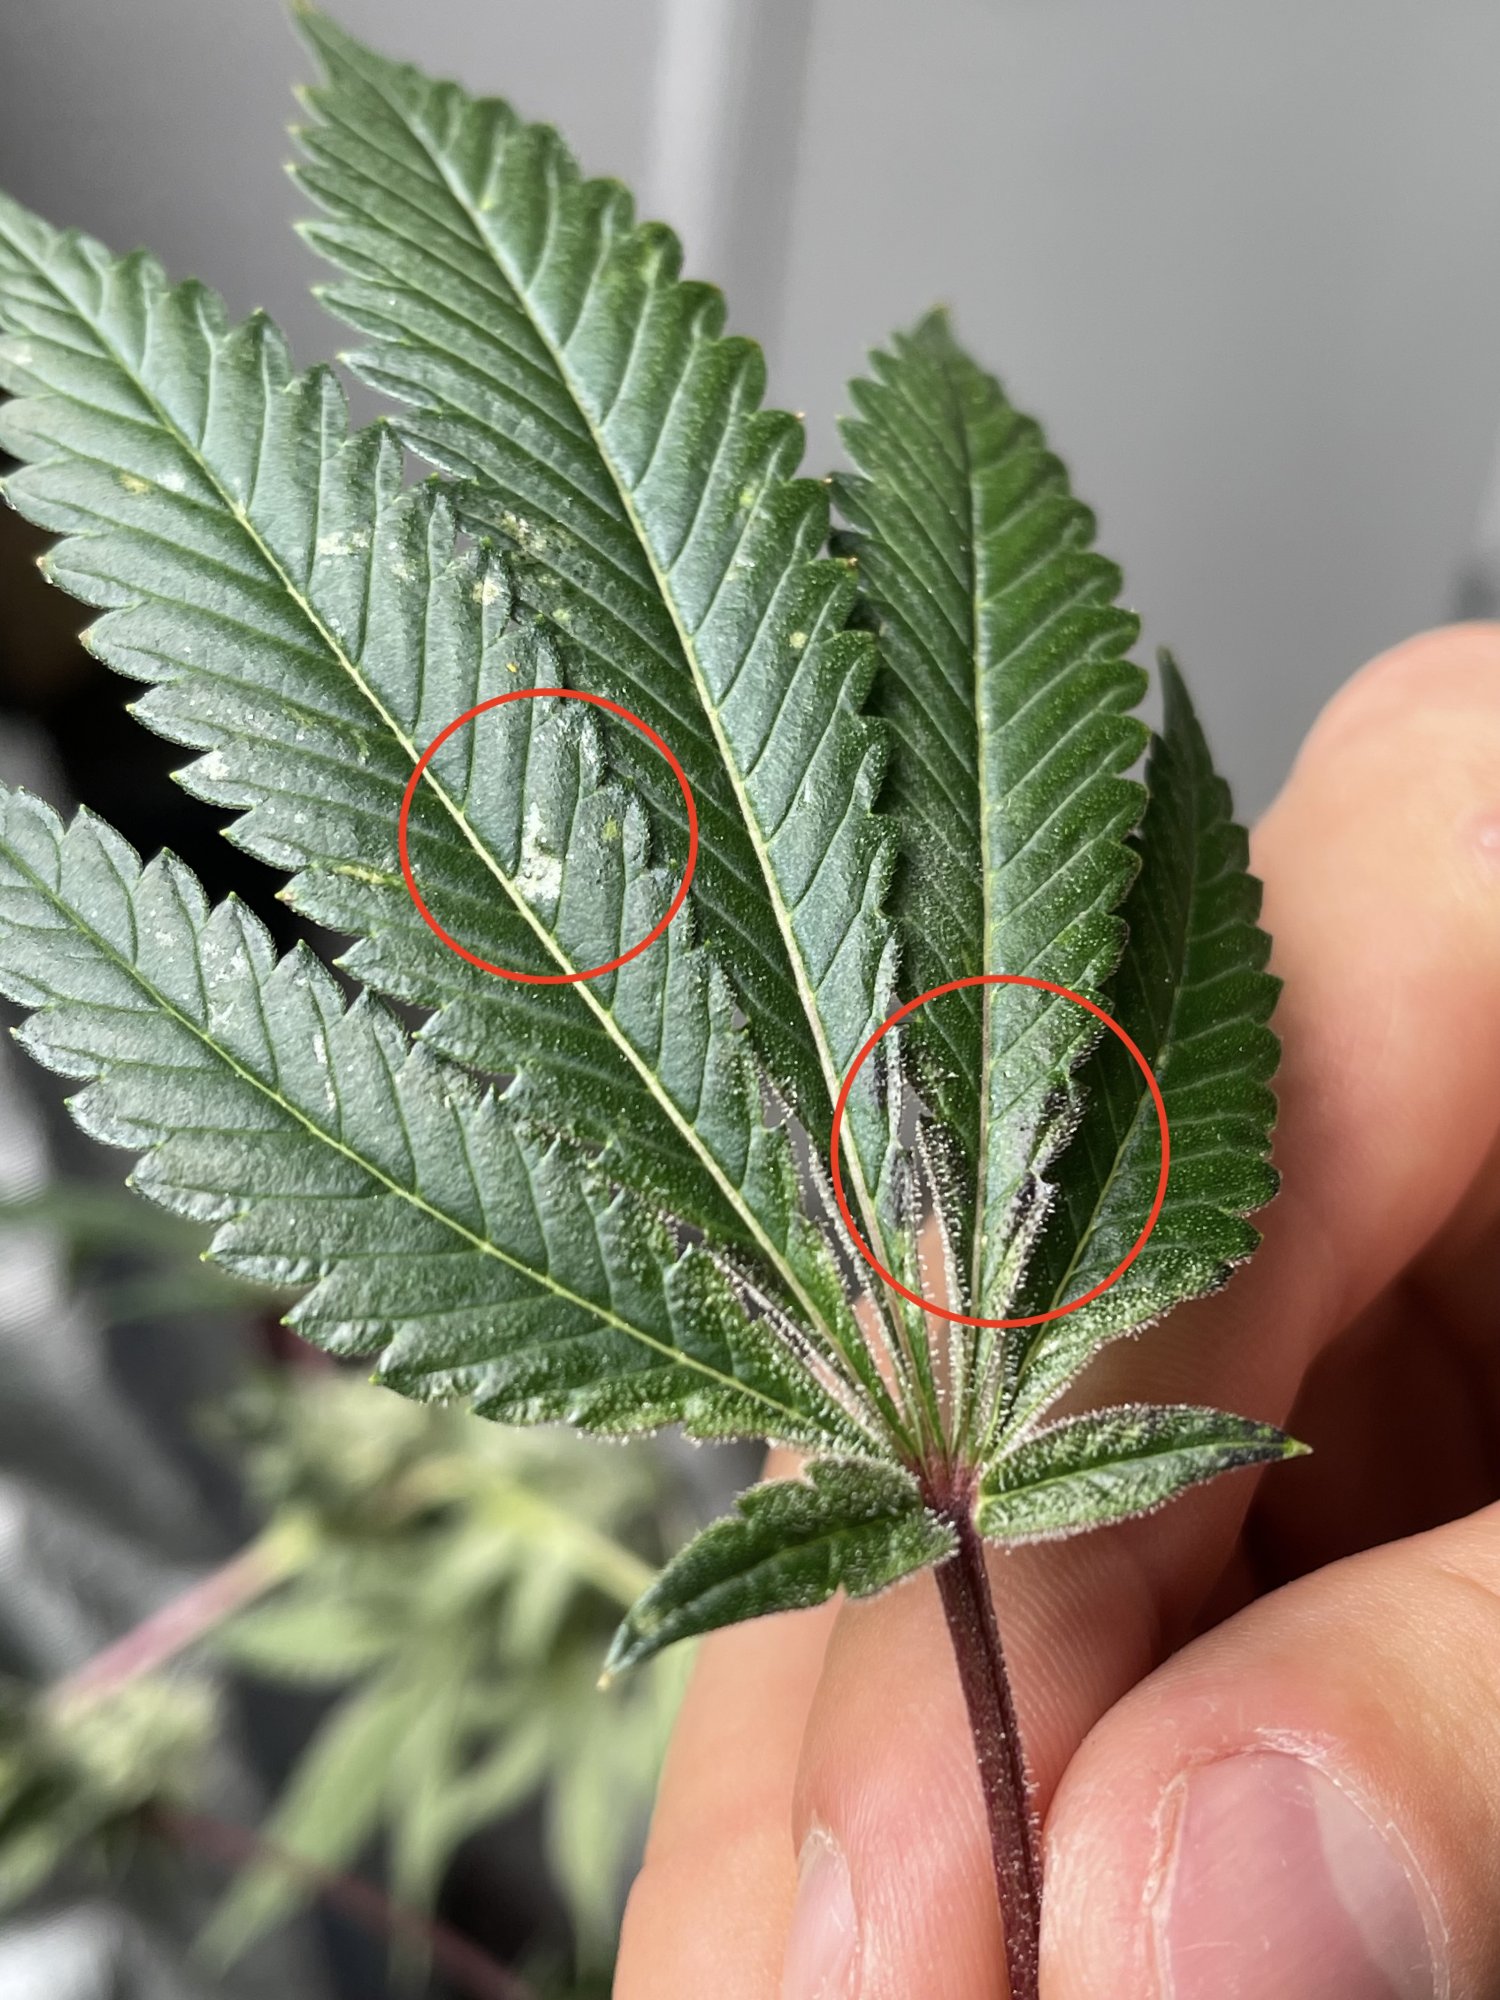 Need your help to diagnose plant symptoms